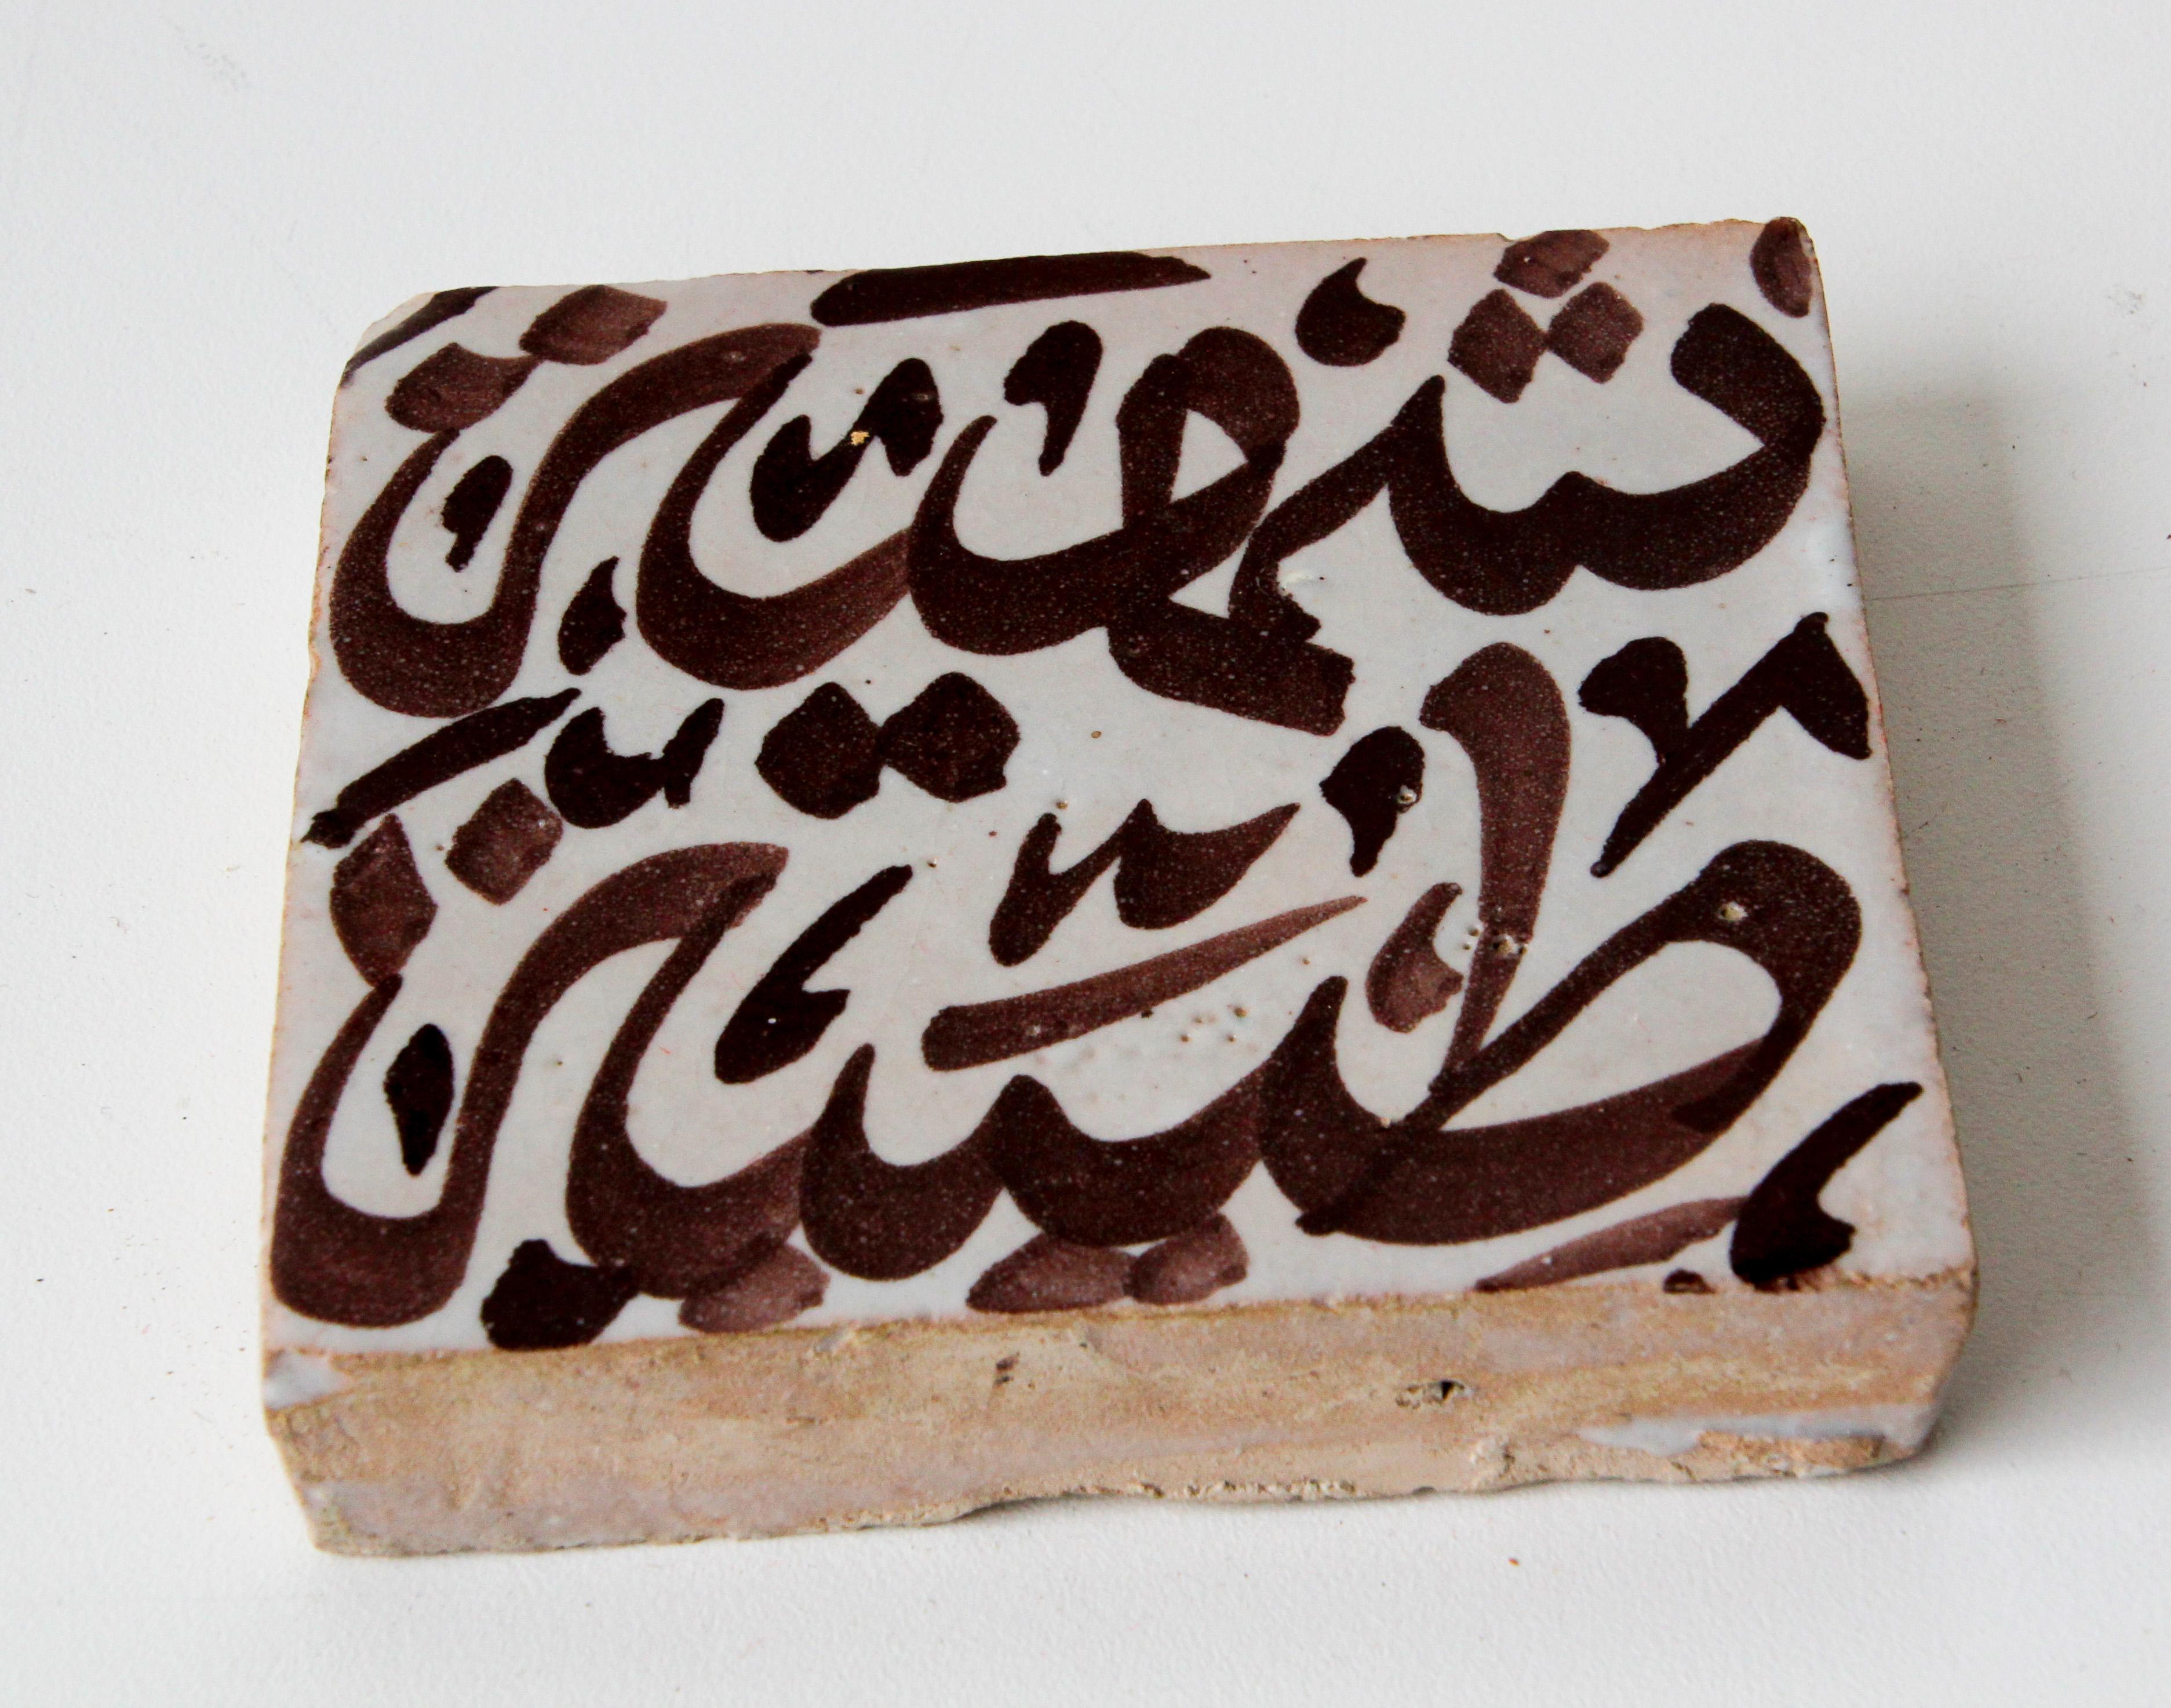 Moroccan handcrafted decorative tile with hand painted Arabic writing in brown on ivory crackle glazed ceramic.
Arabic writing on ceramic tile hand painted by artist in Fez Morocco.
Great Zellige decorative Moorish Artwork.
Tile is 4 in. x 4 in.